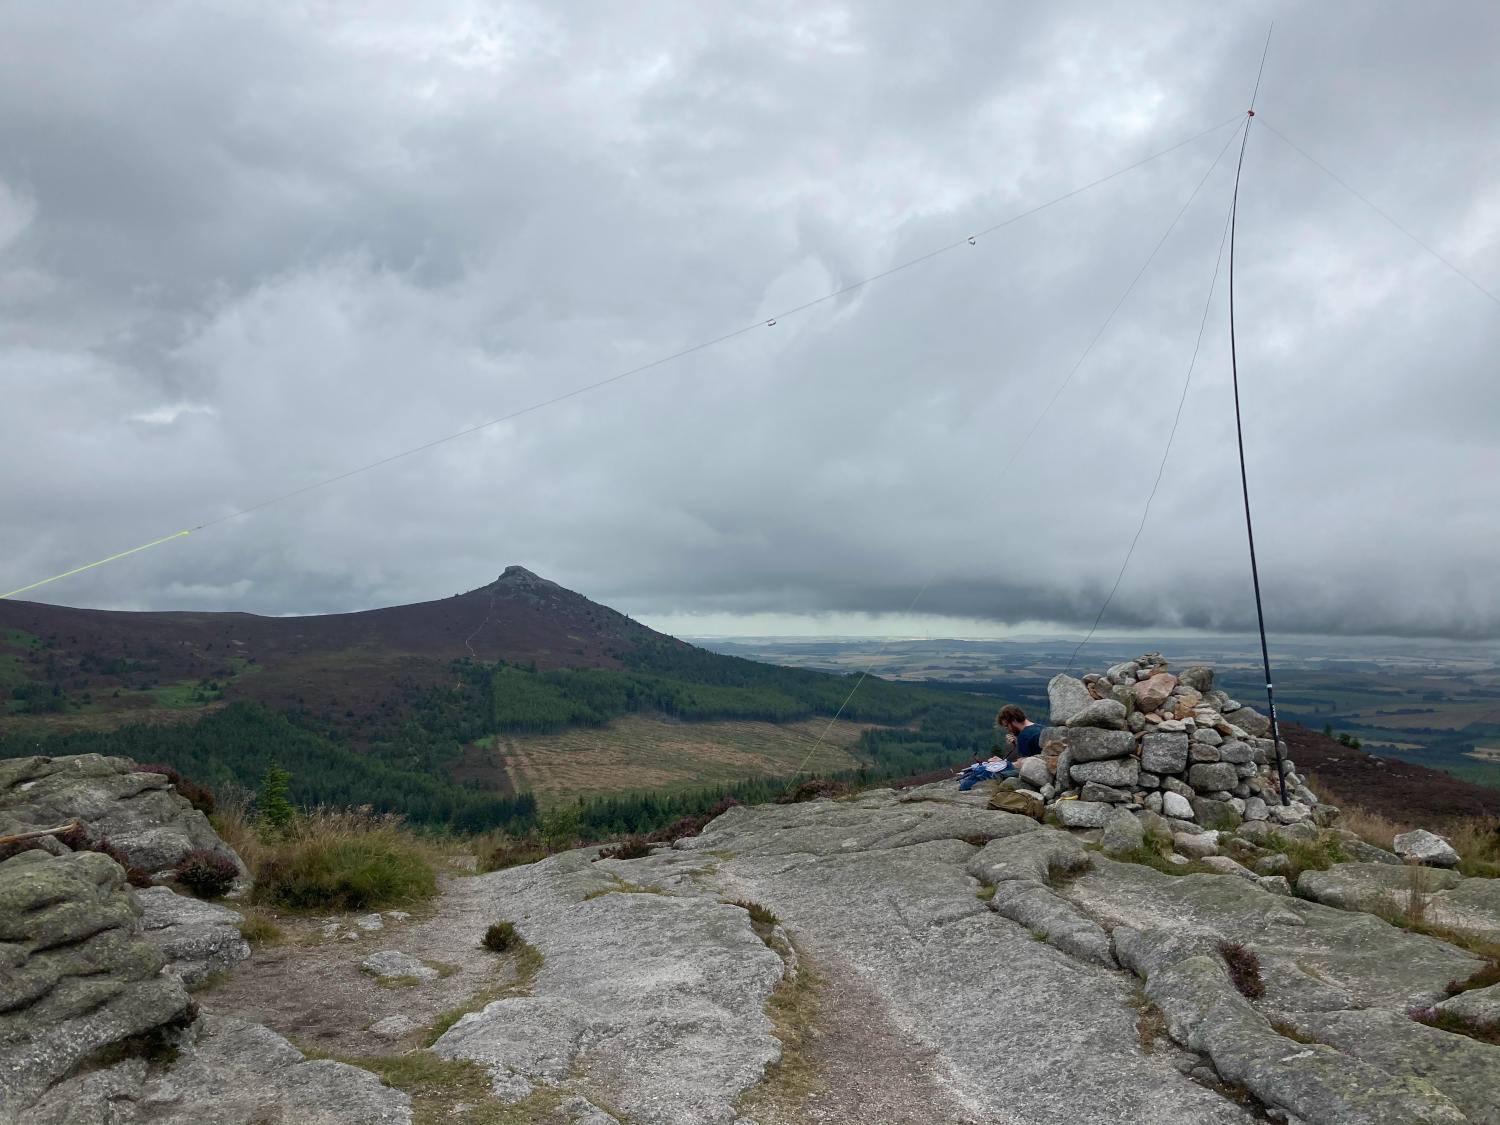 Me, sat behind a cairn, at the base of a mast operating a radio